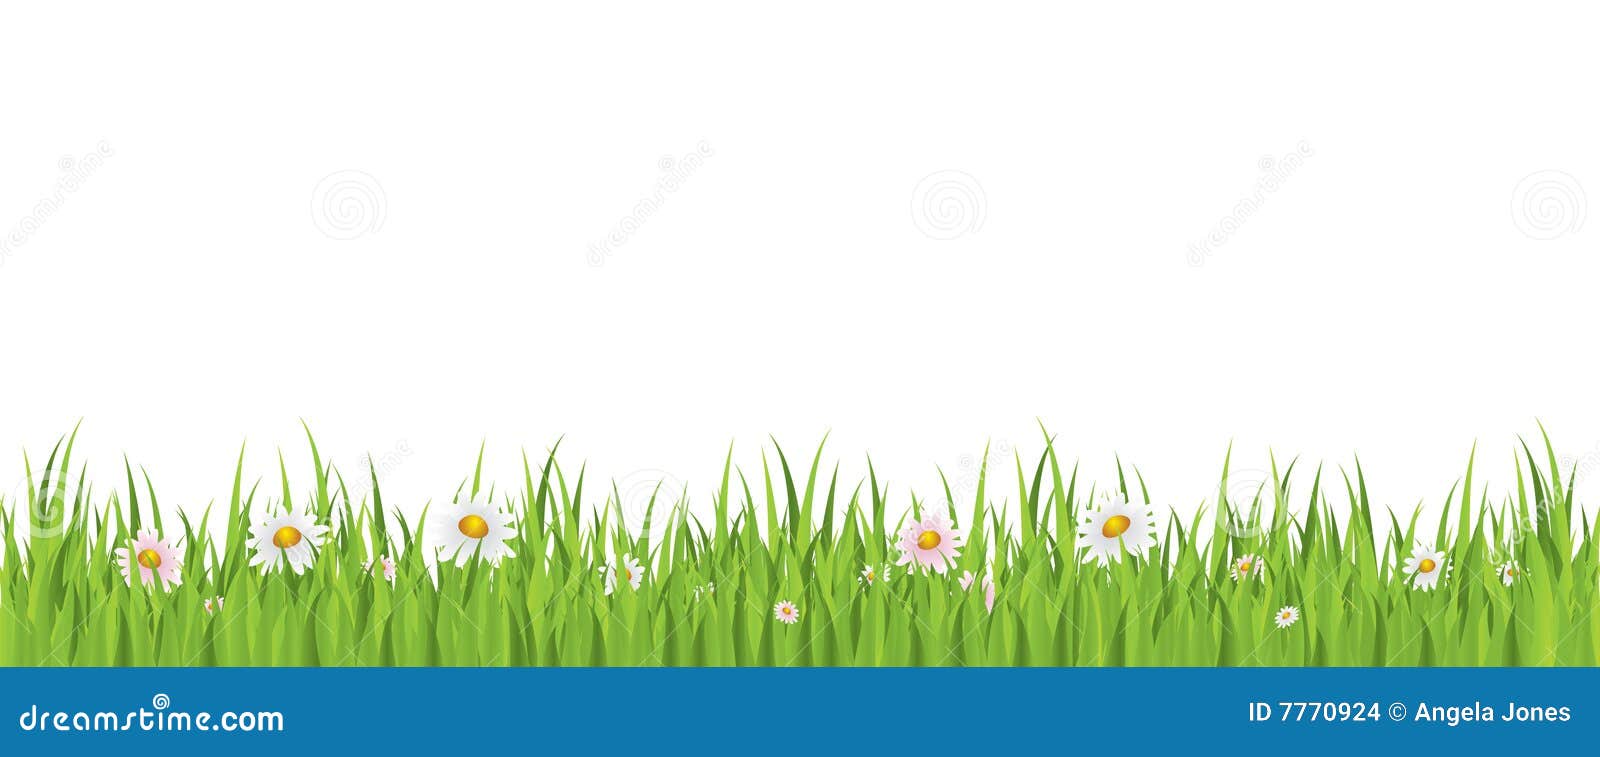 spring flower and grass seamless background